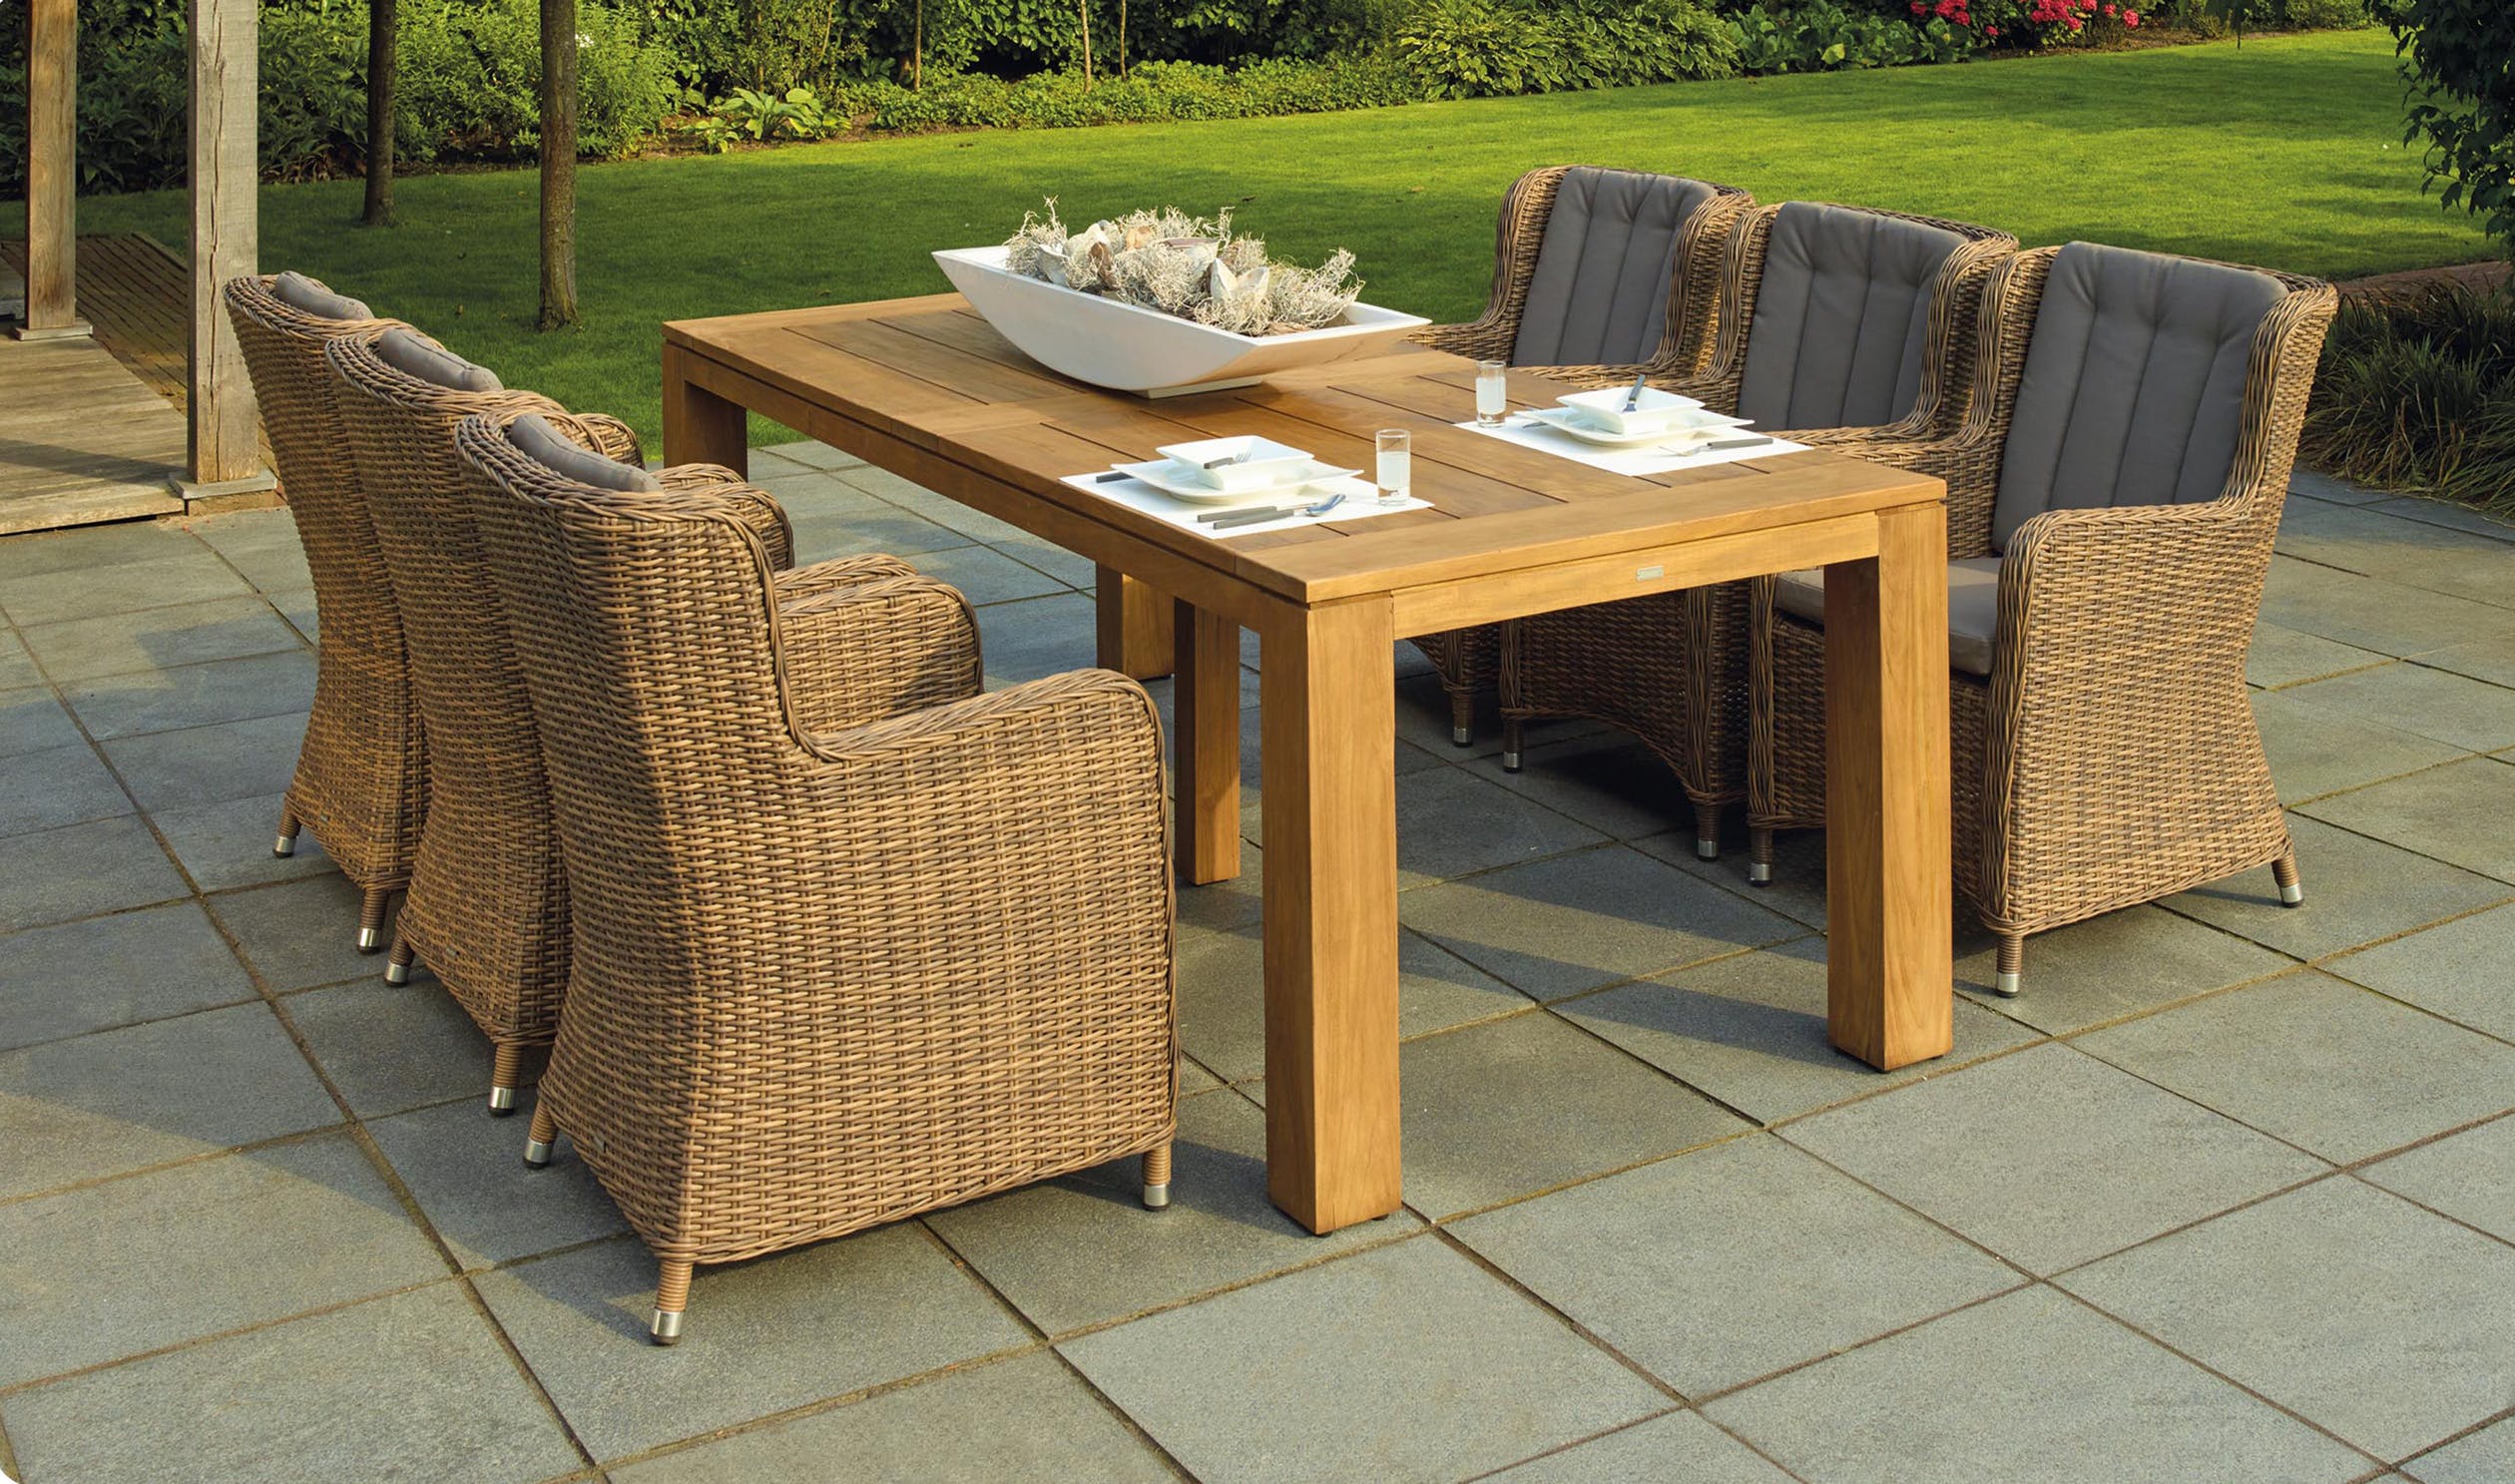 Is It Time To Move Outdoor Furniture Inside?